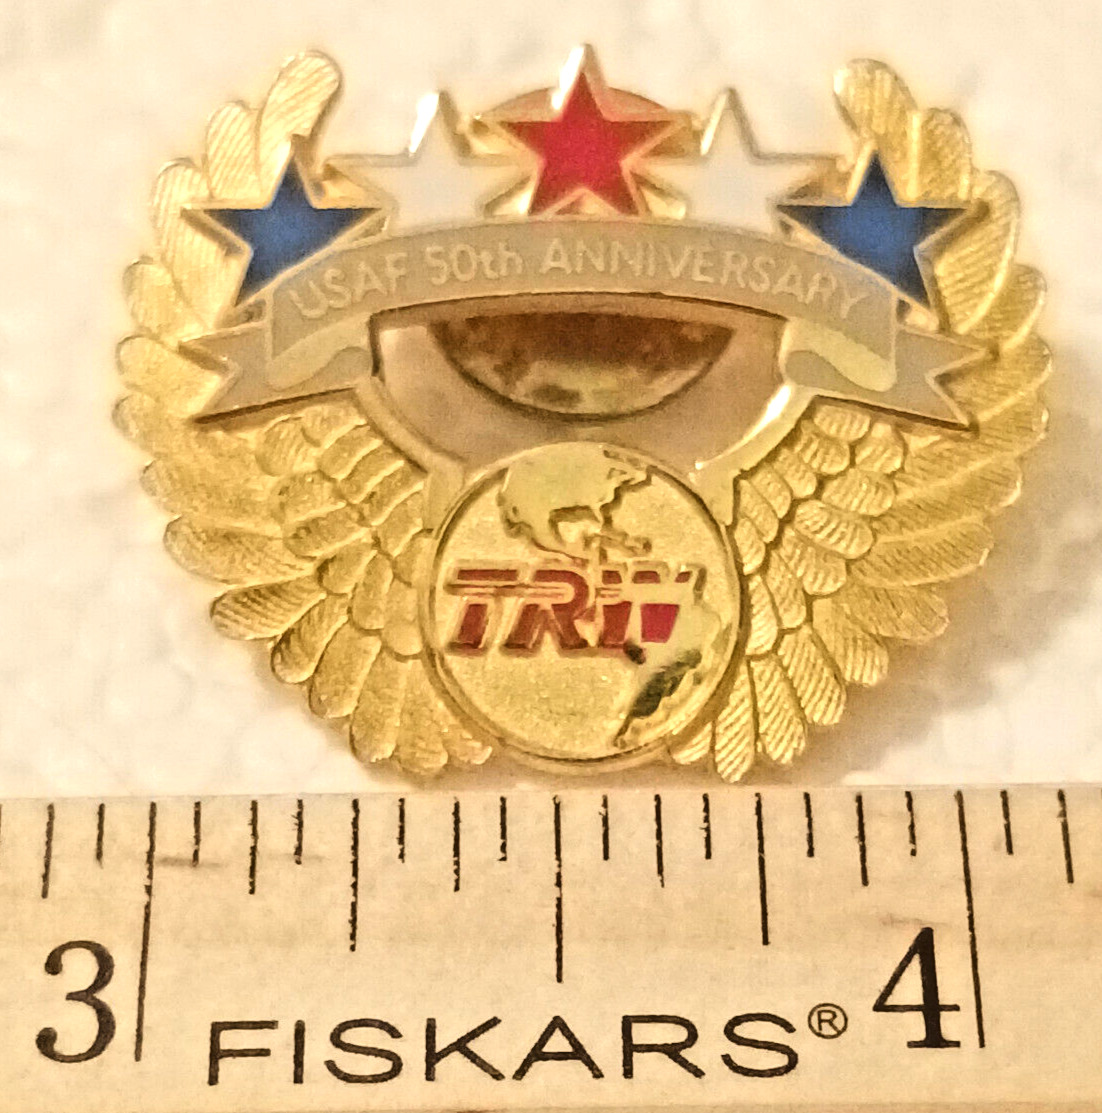 US Air Force 50th Anniversary TRW Wing Pin